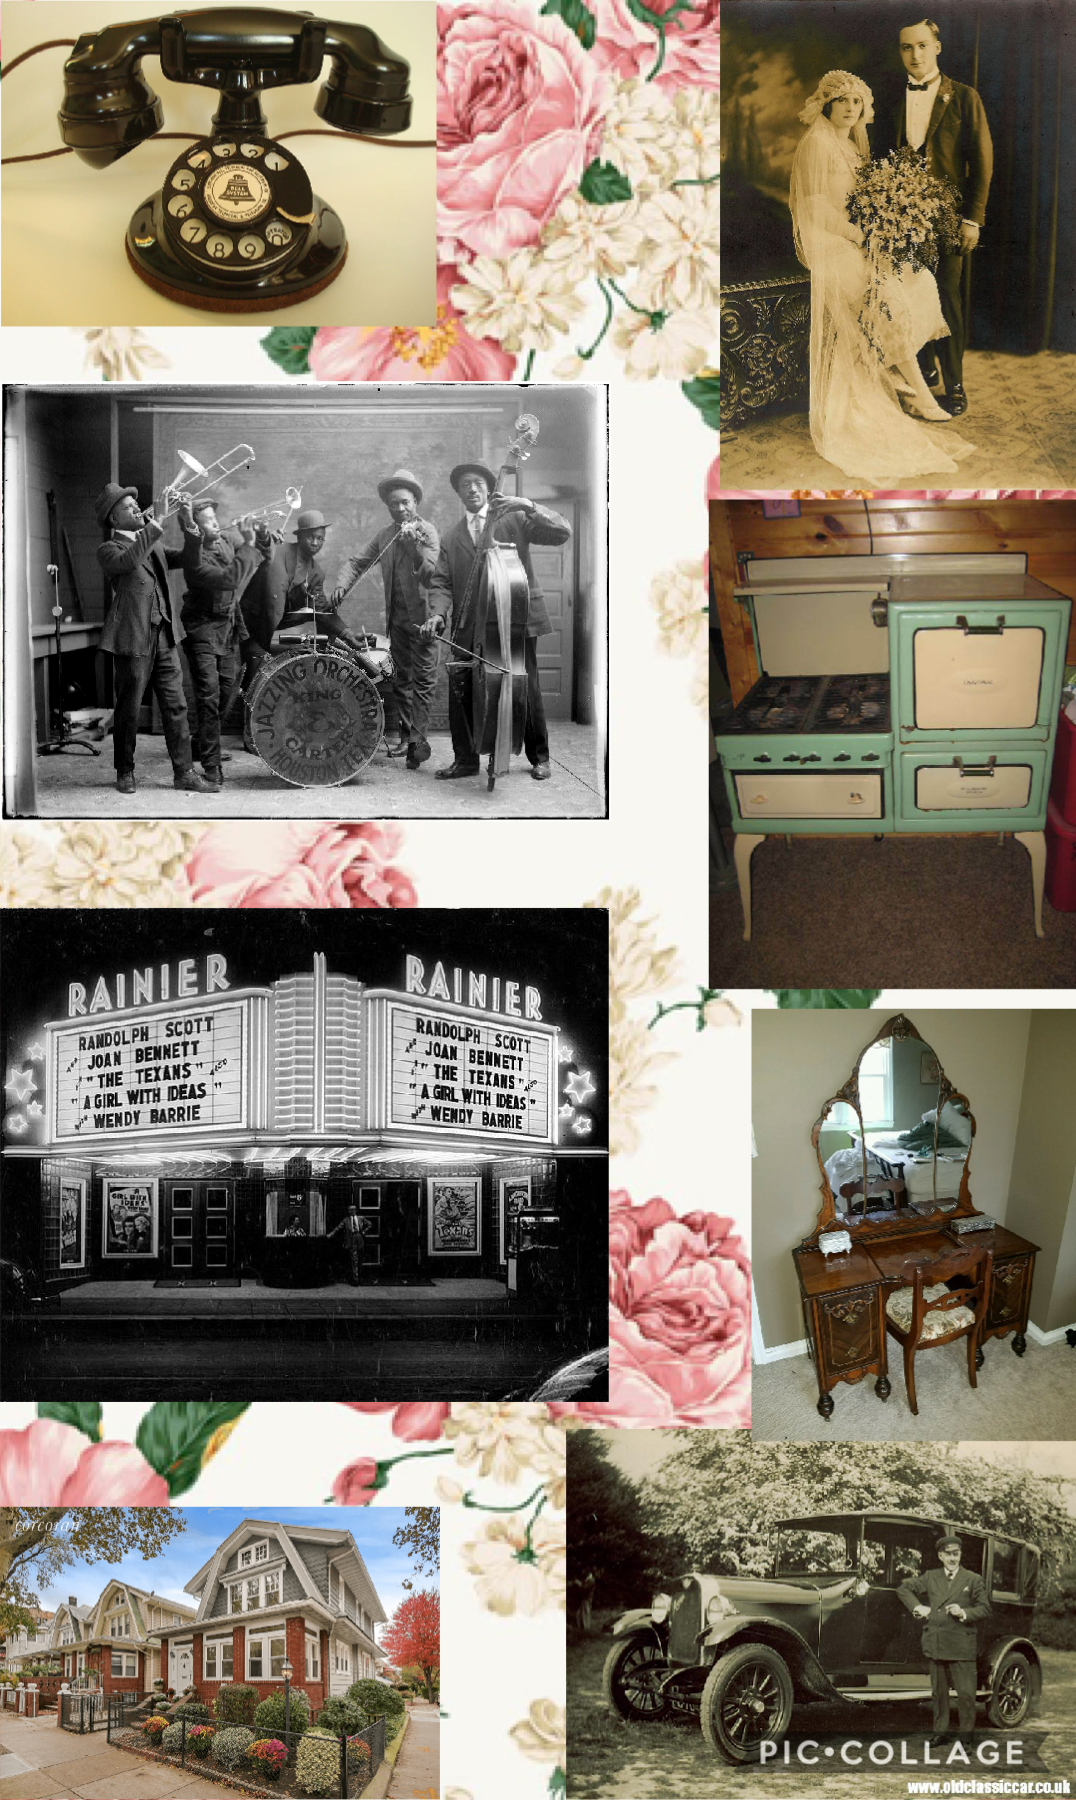 Tap 
Hey guys I am starting a 1900 sort of timeline thing IDK I am going to be doing 1920s to 1990s this is a 1920s theme with the vintage background to the old photos 